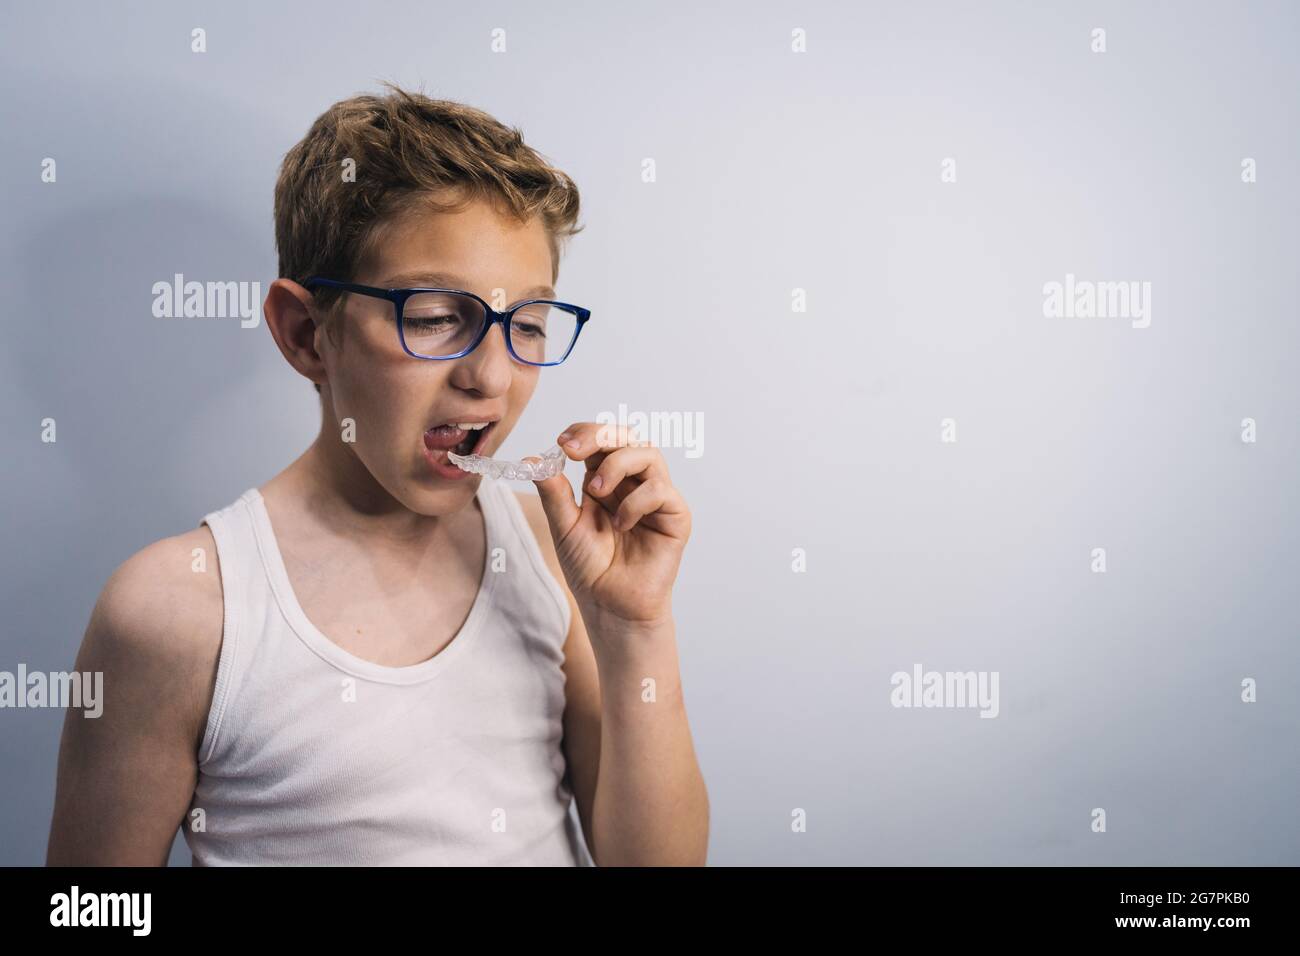 Male caucasian kid with sleeveless shirt wearing the mouthguard Stock Photo